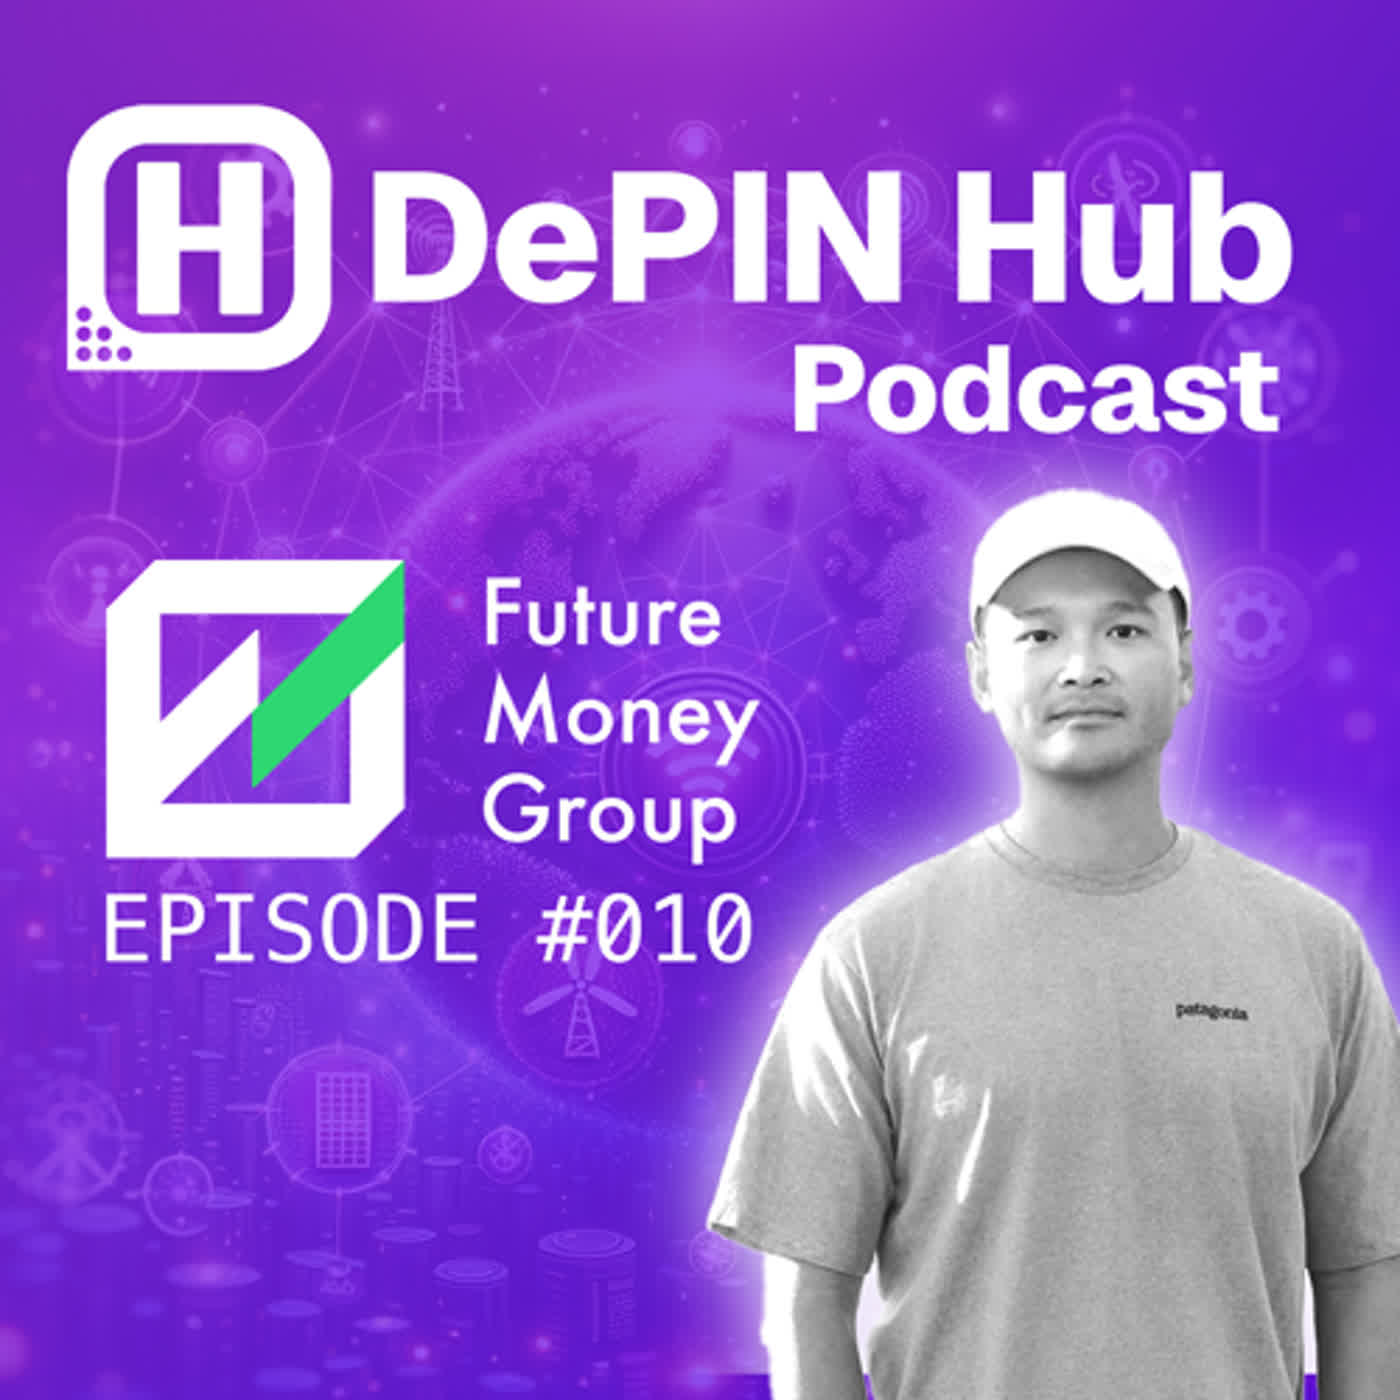 #010 - Future Money Group - The Future of Work